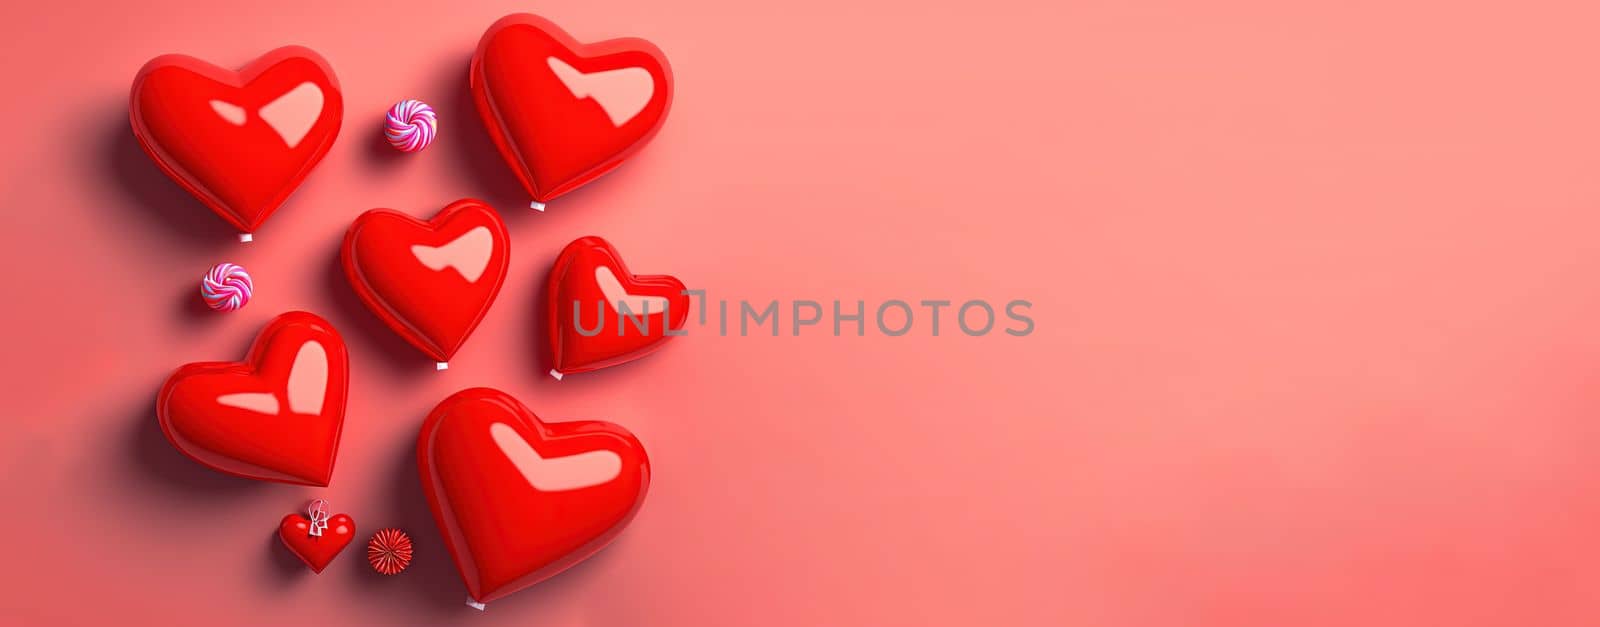 Red 3D heart on a happy Valentine's Day banner background by templator